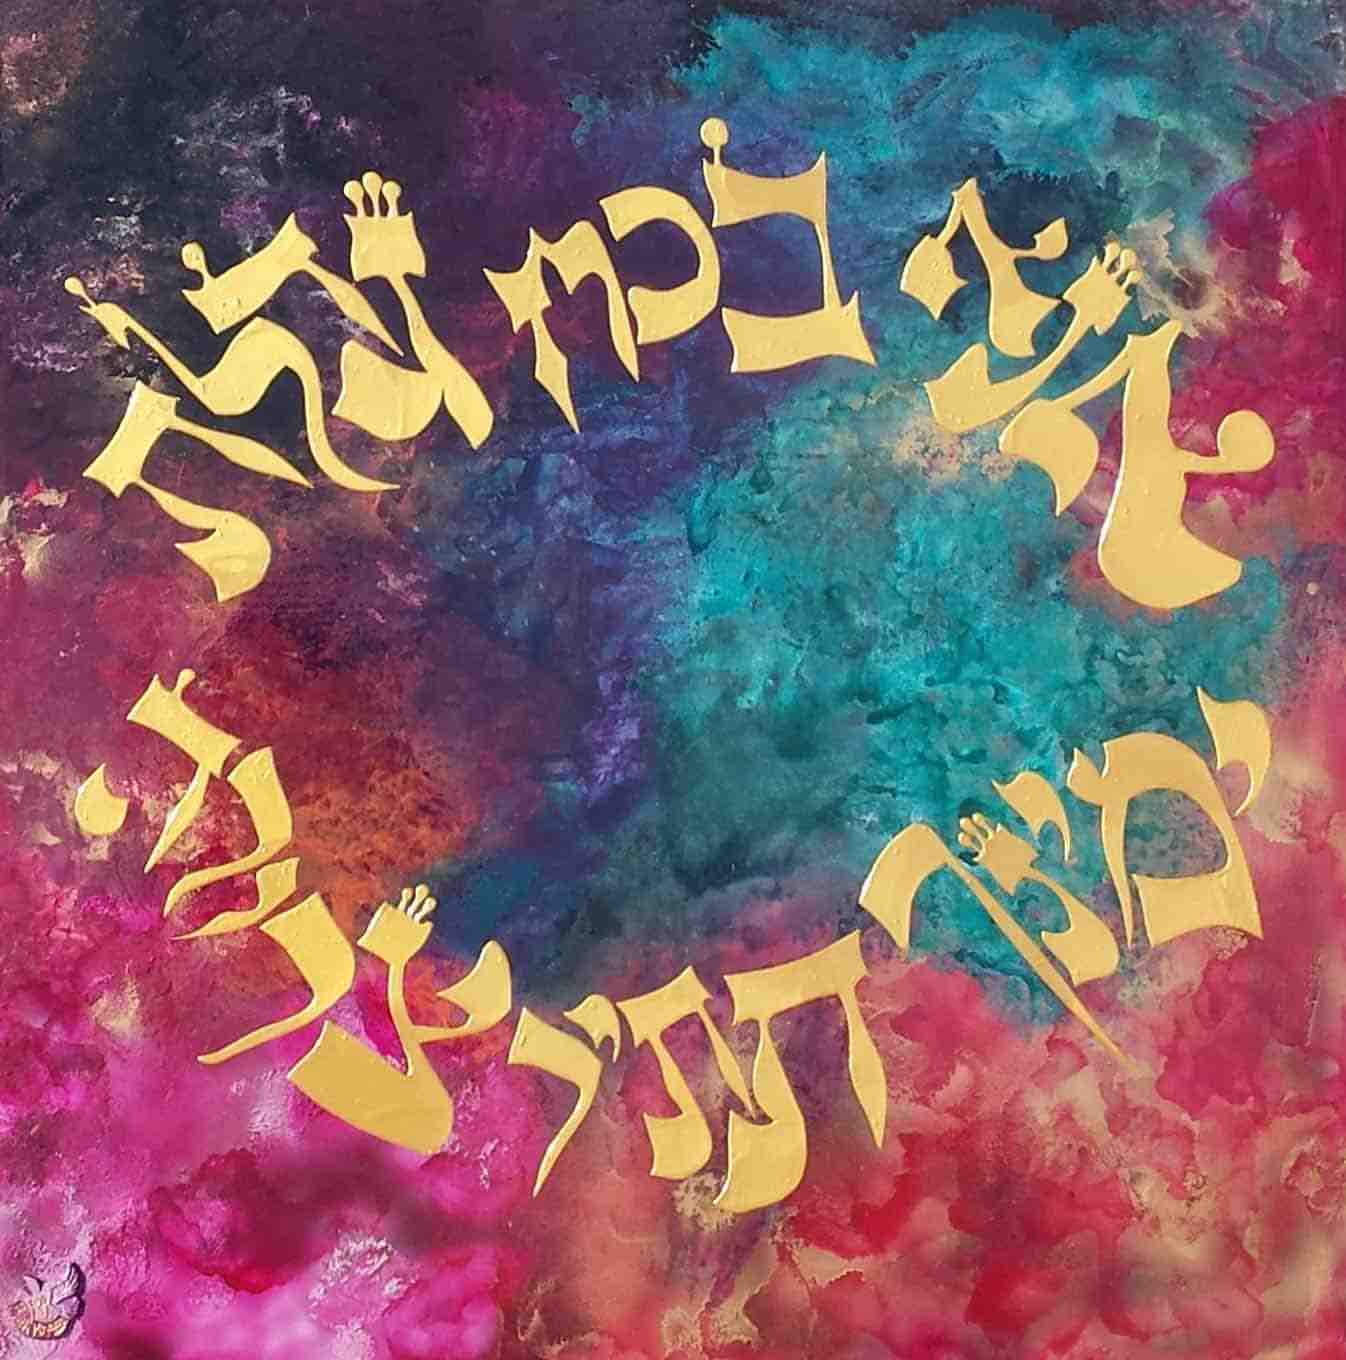 42 Letter Name of G-d: 'Ana BeKoach'